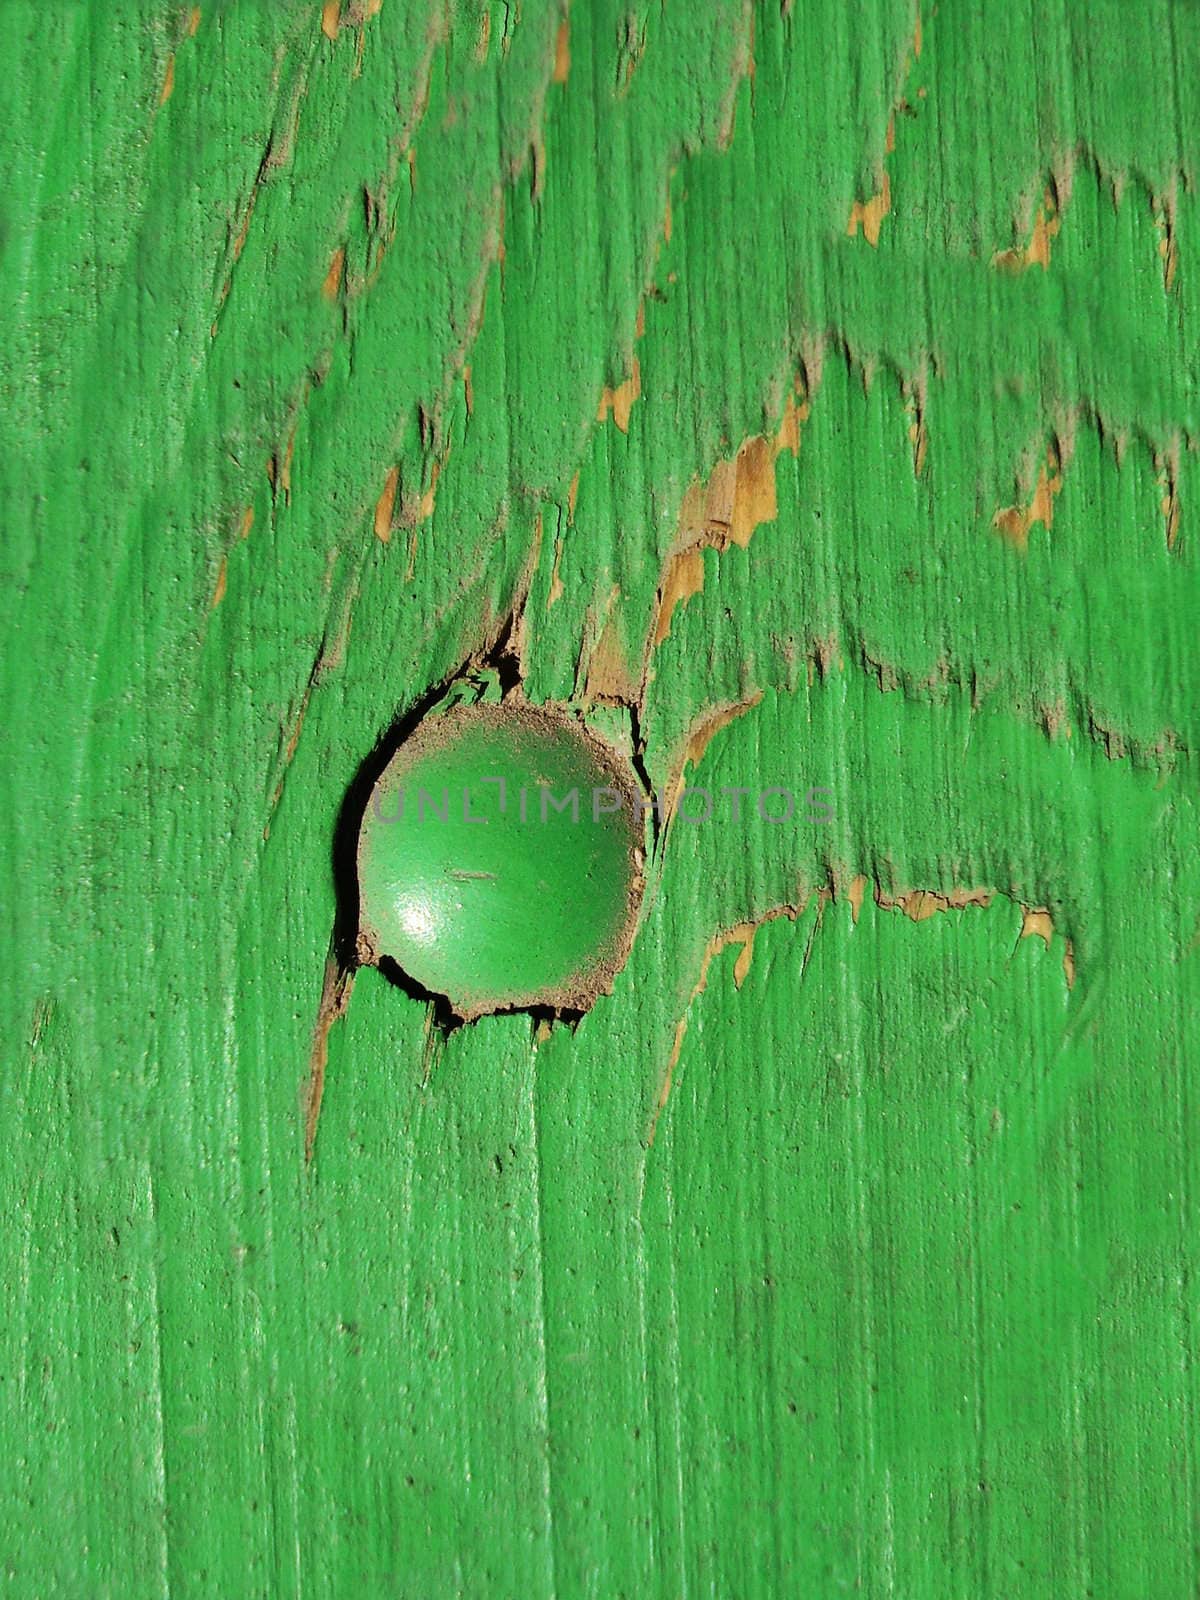 Old Green Wooden Background with One Bolt  